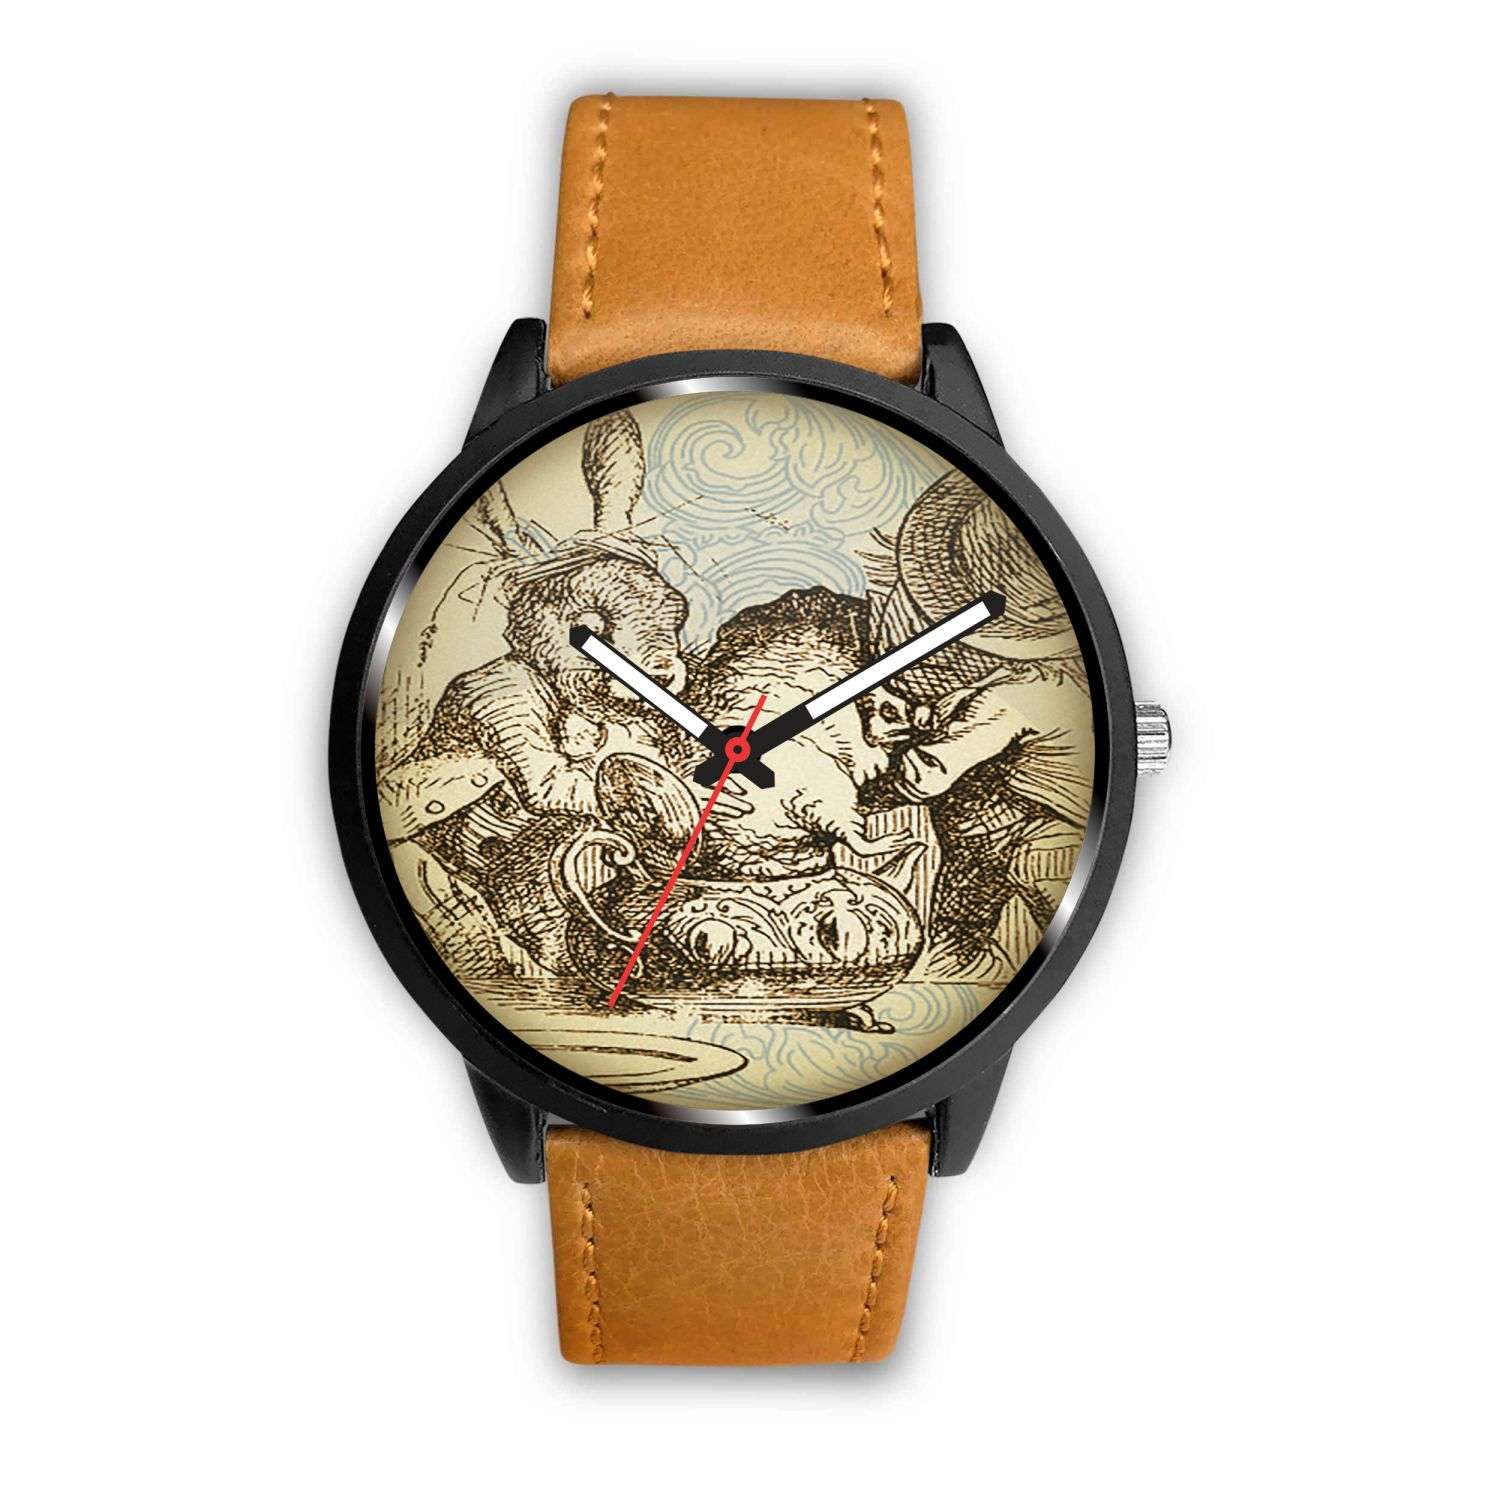 Limited Edition Vintage Inspired Custom Watch Mad Hatter Tea Party Alice in Wonderland 10.2